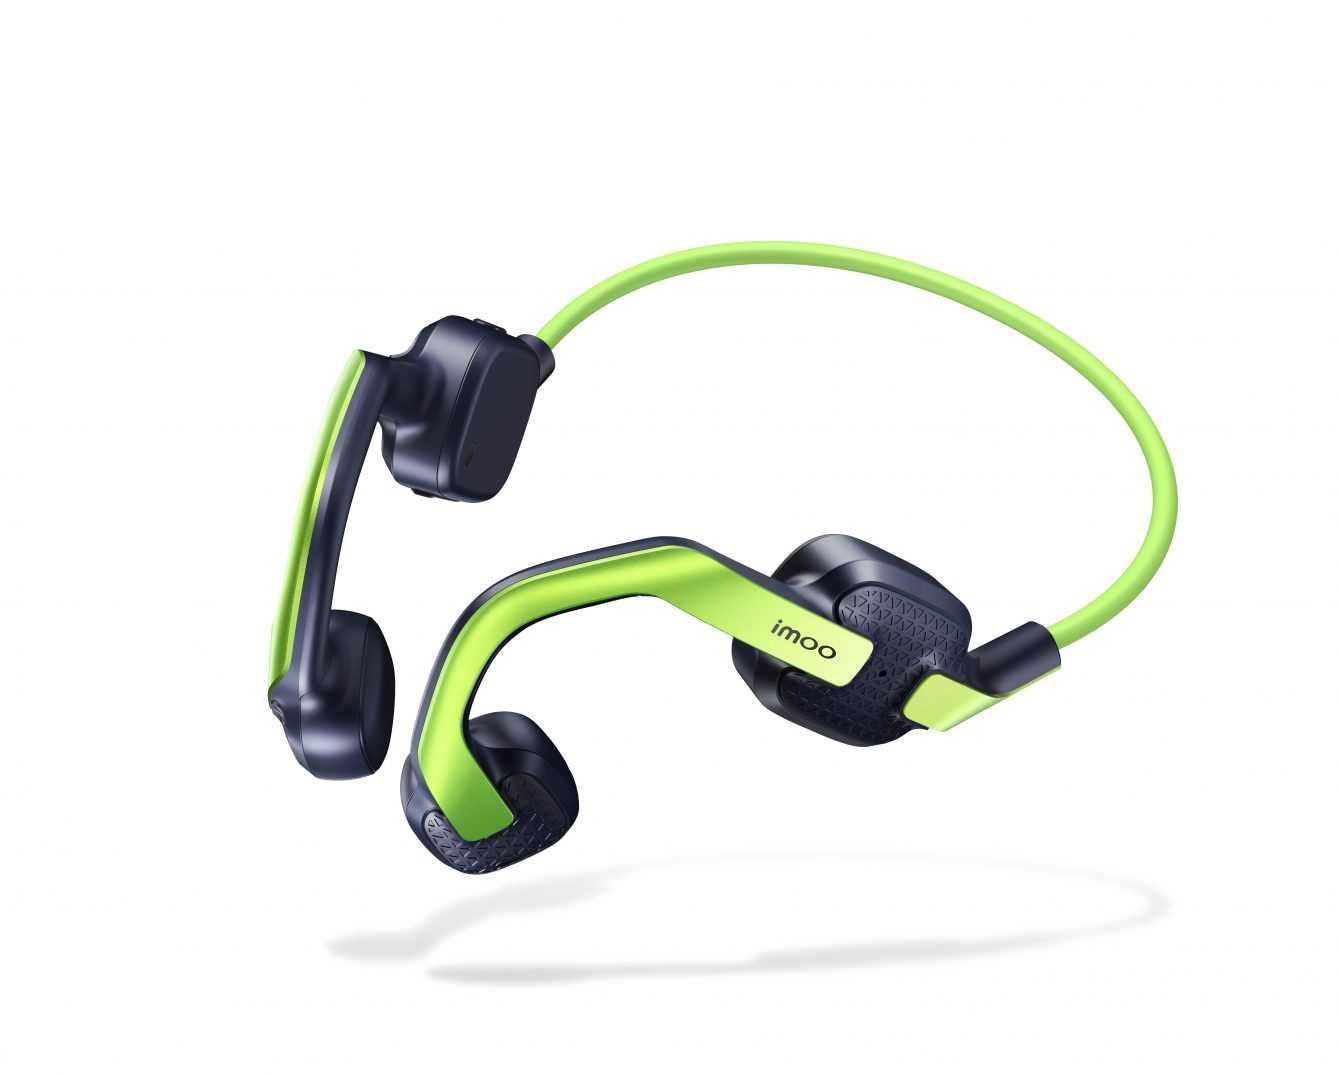 Imoo Ear-care Headset: the first TWS earphones for children